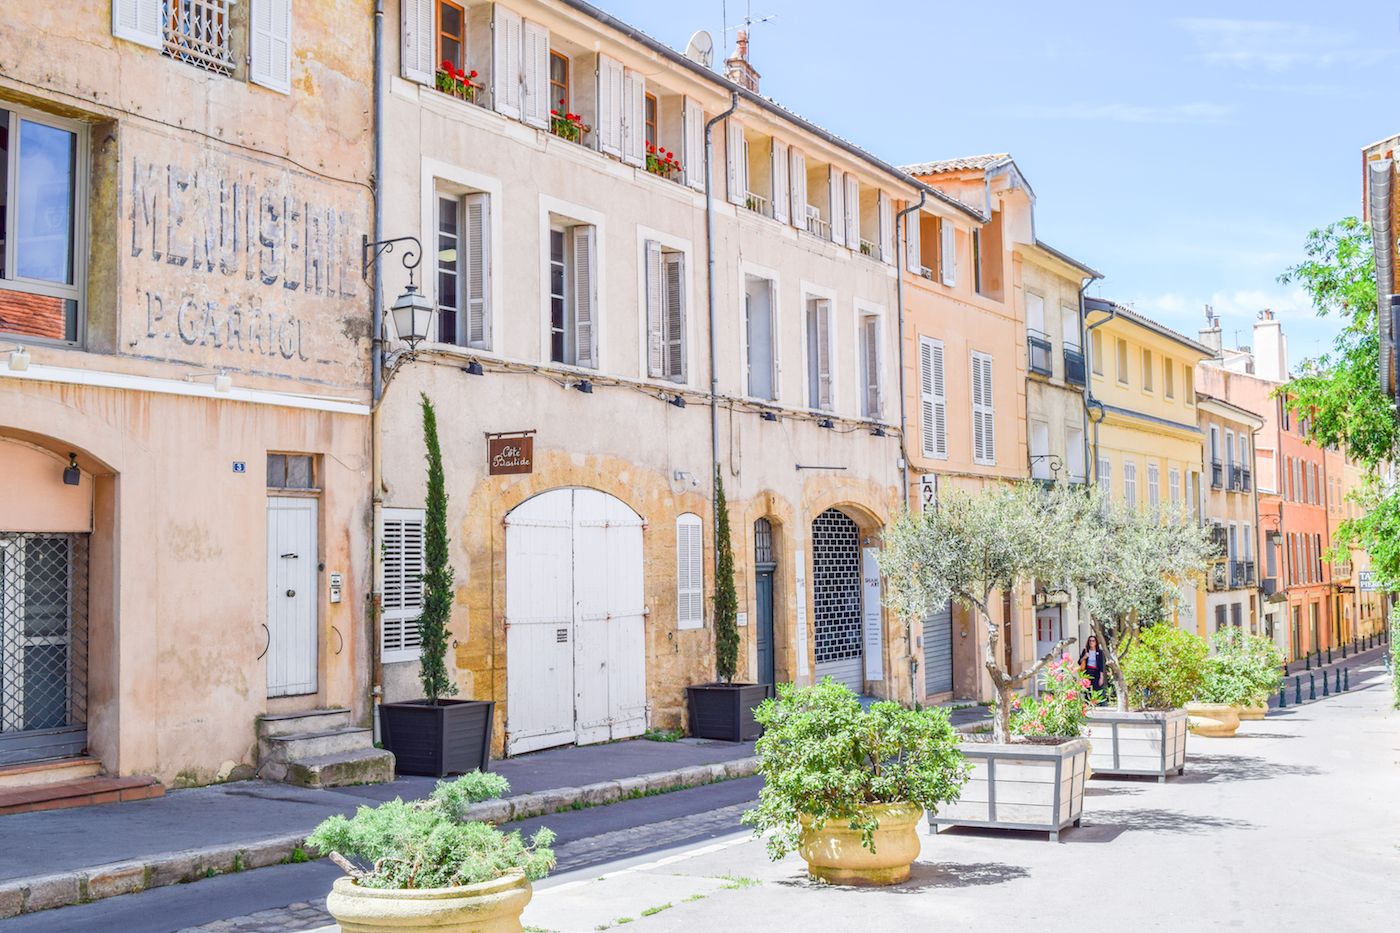 11 Best Places to Visit in France – Provence, France